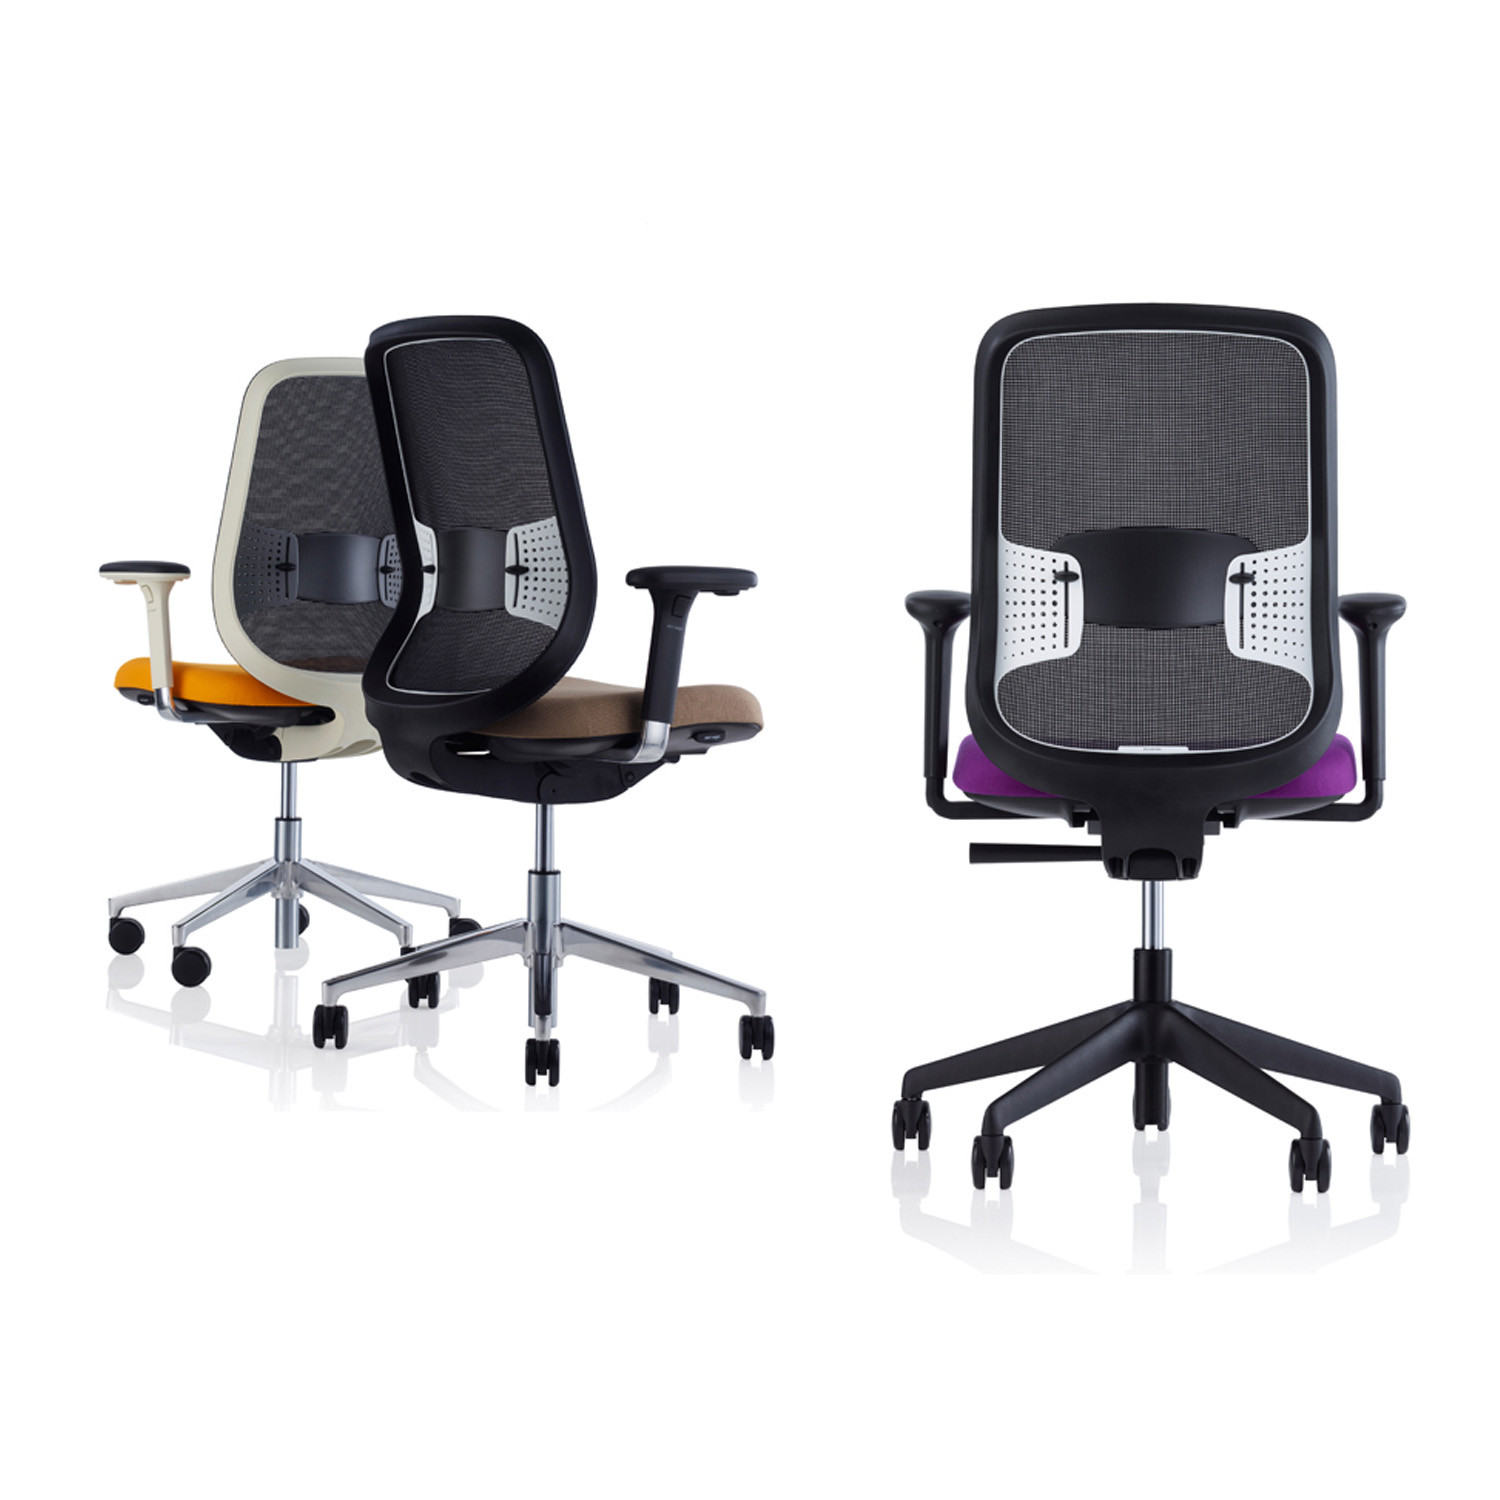 Do Mesh Back Office Chairs from Orangebox